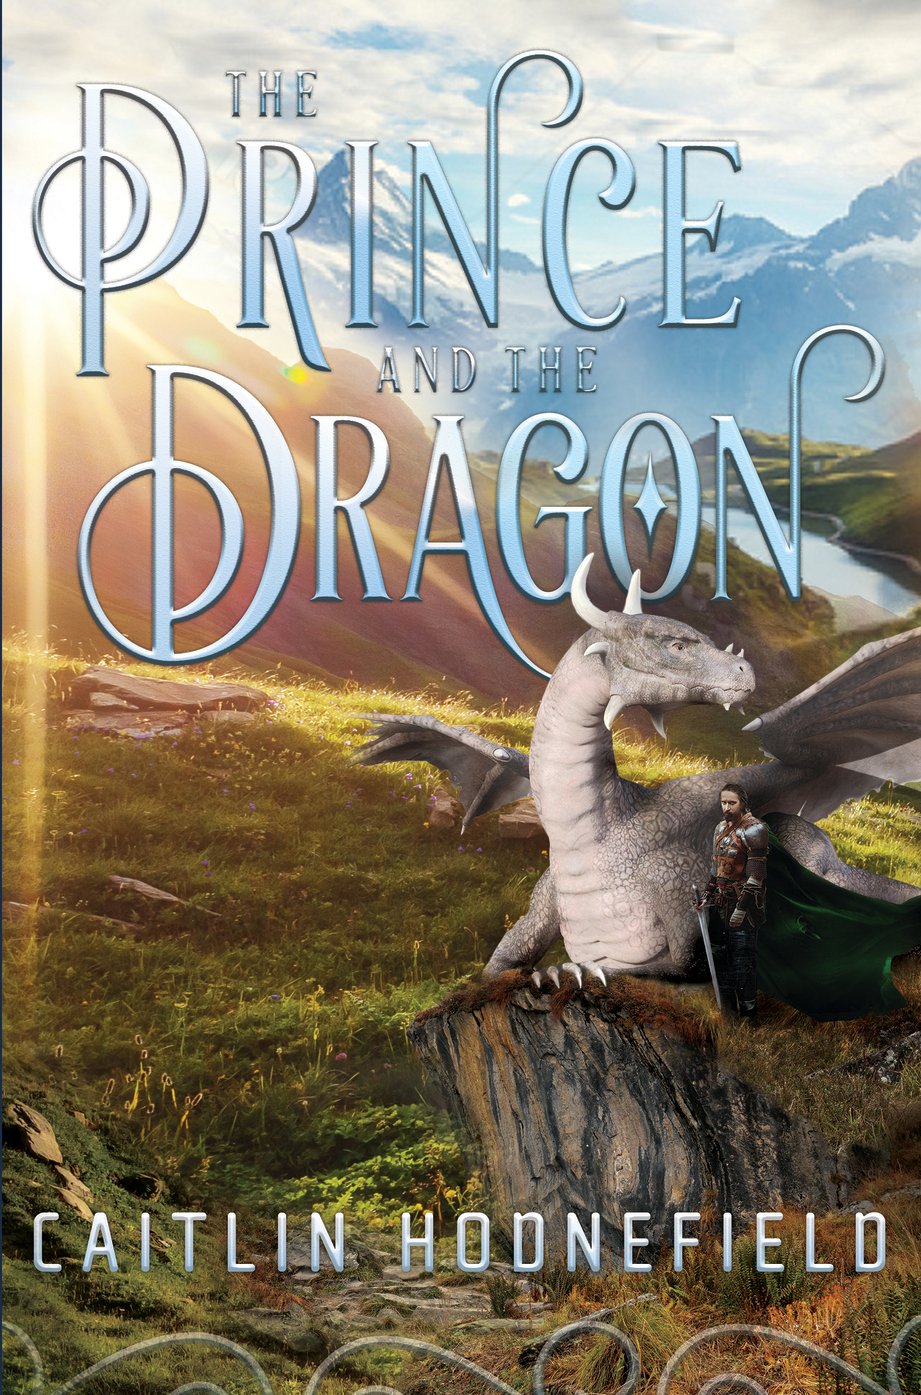 The_Prince_and_The_Dragon_frontcover (1) - Copy.jpg